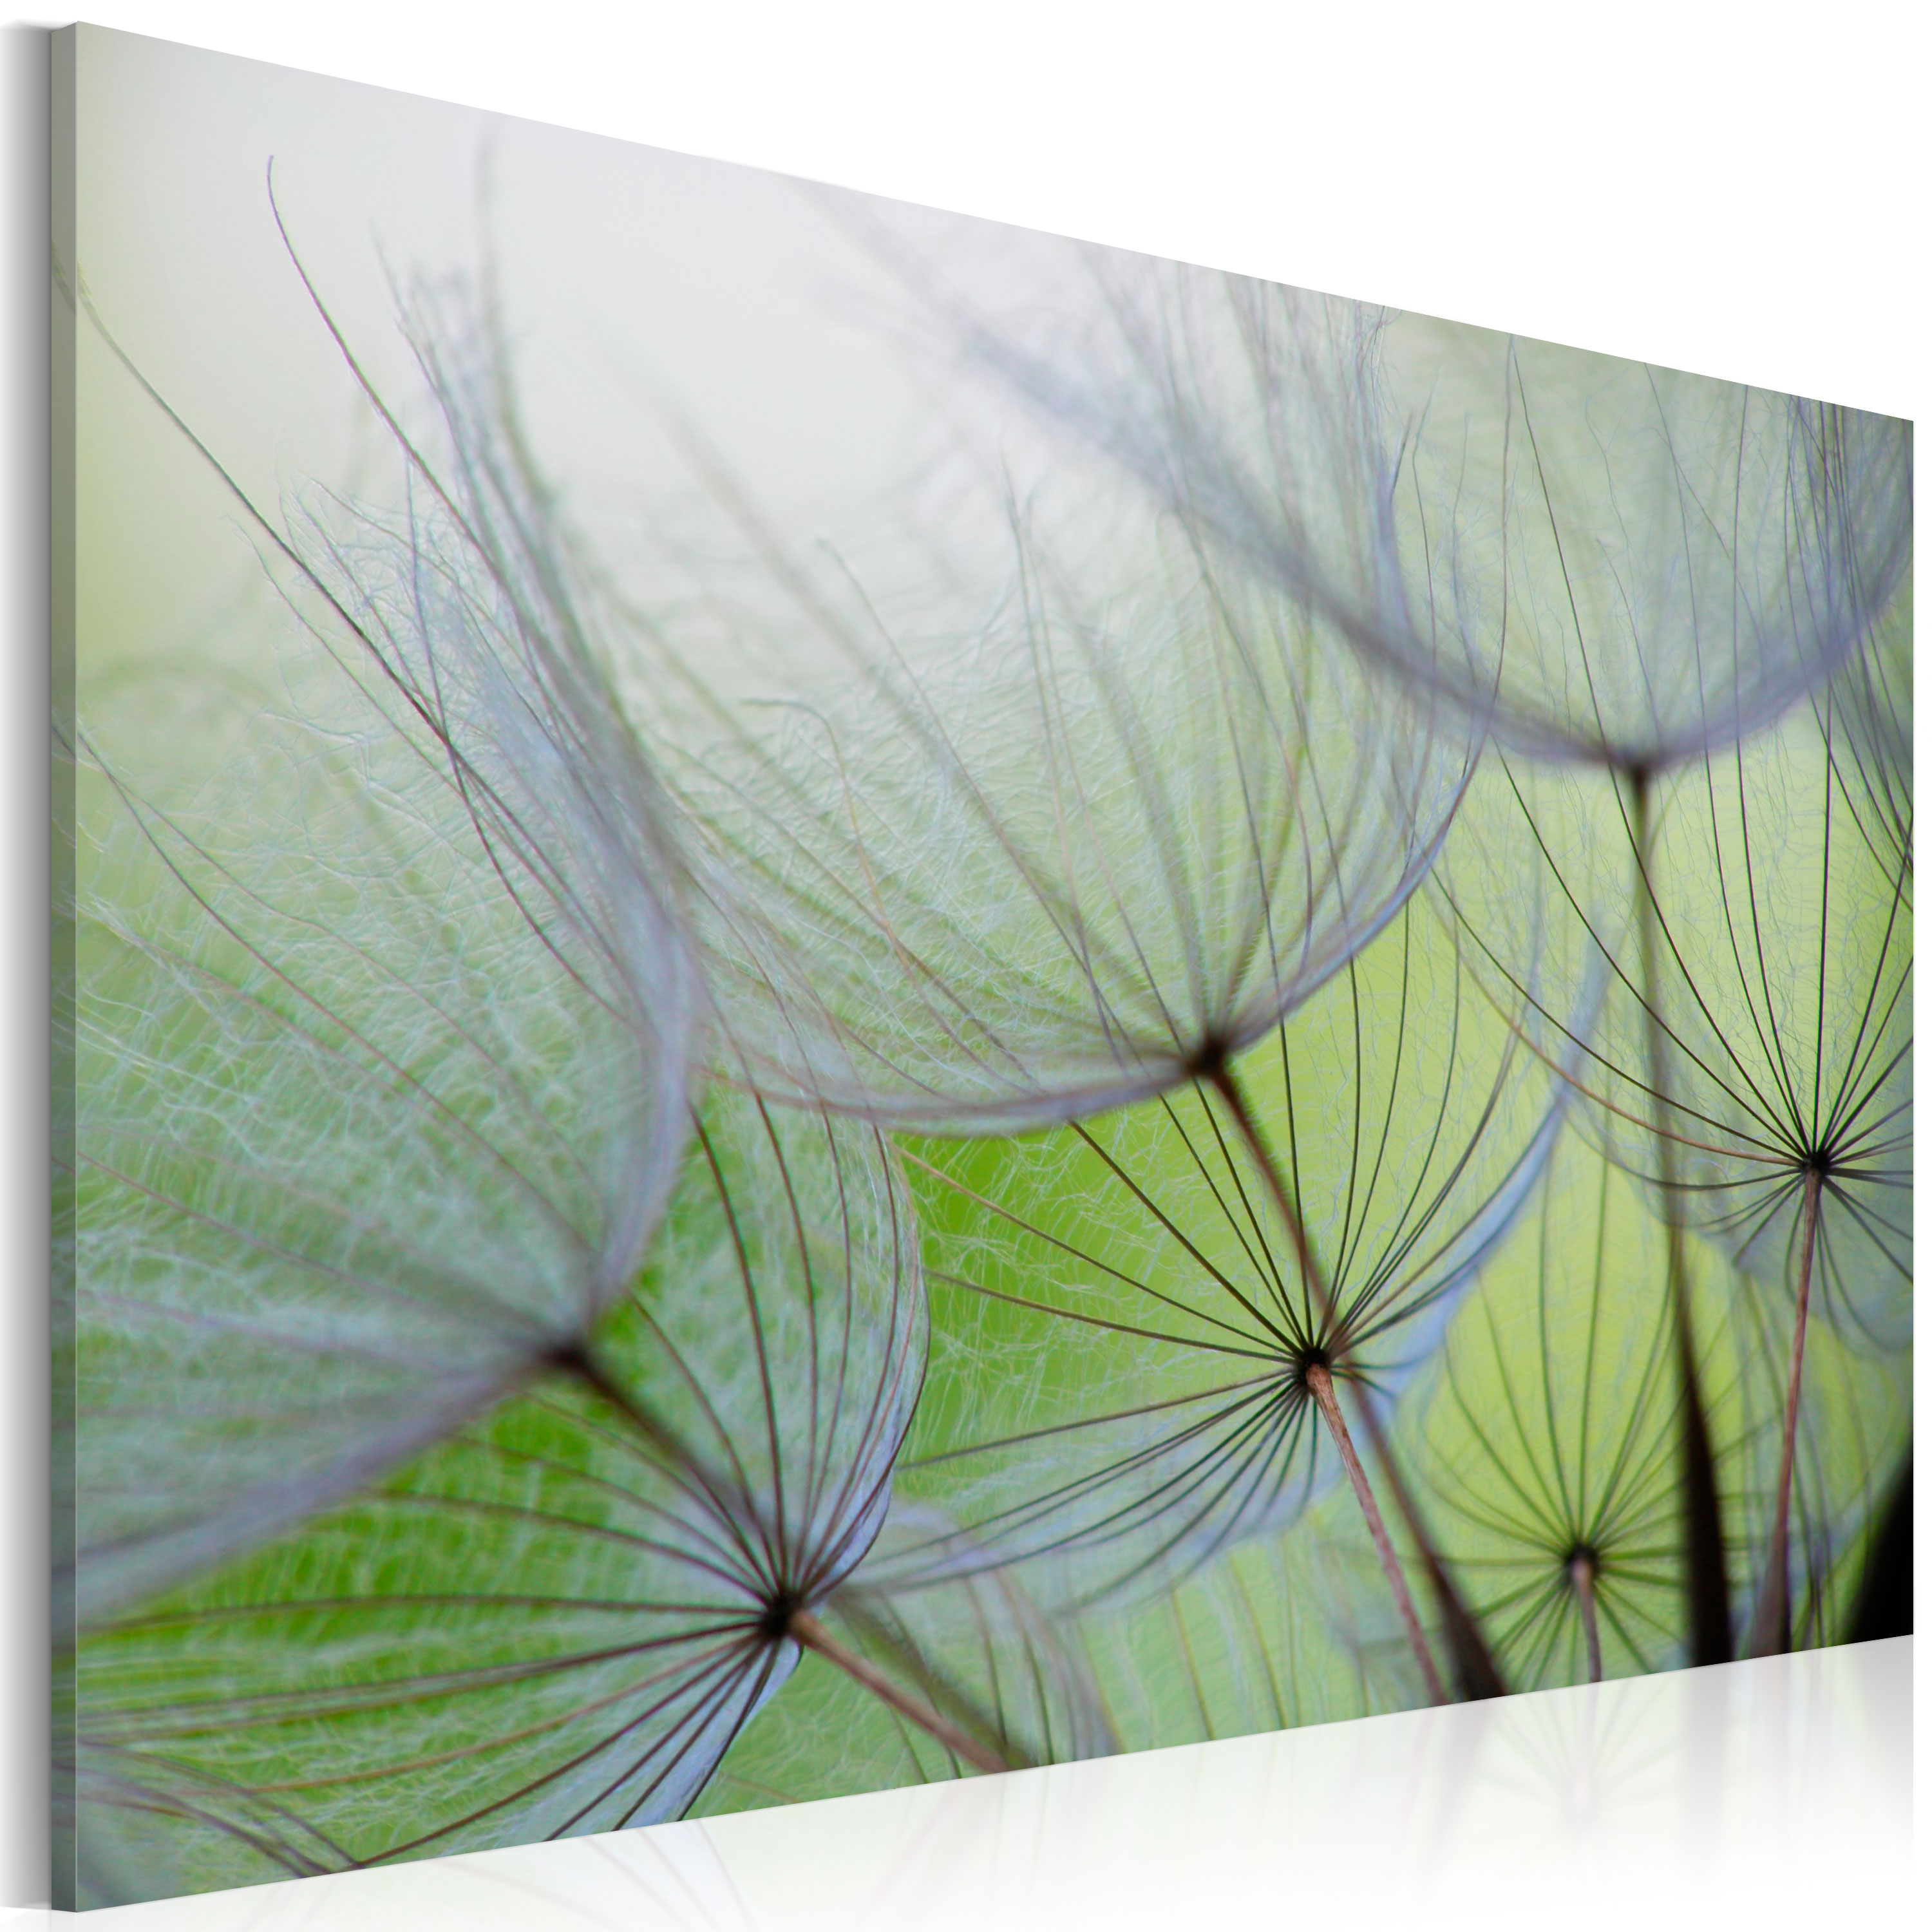 Canvas Print - Dandelion in the wind - 120x80